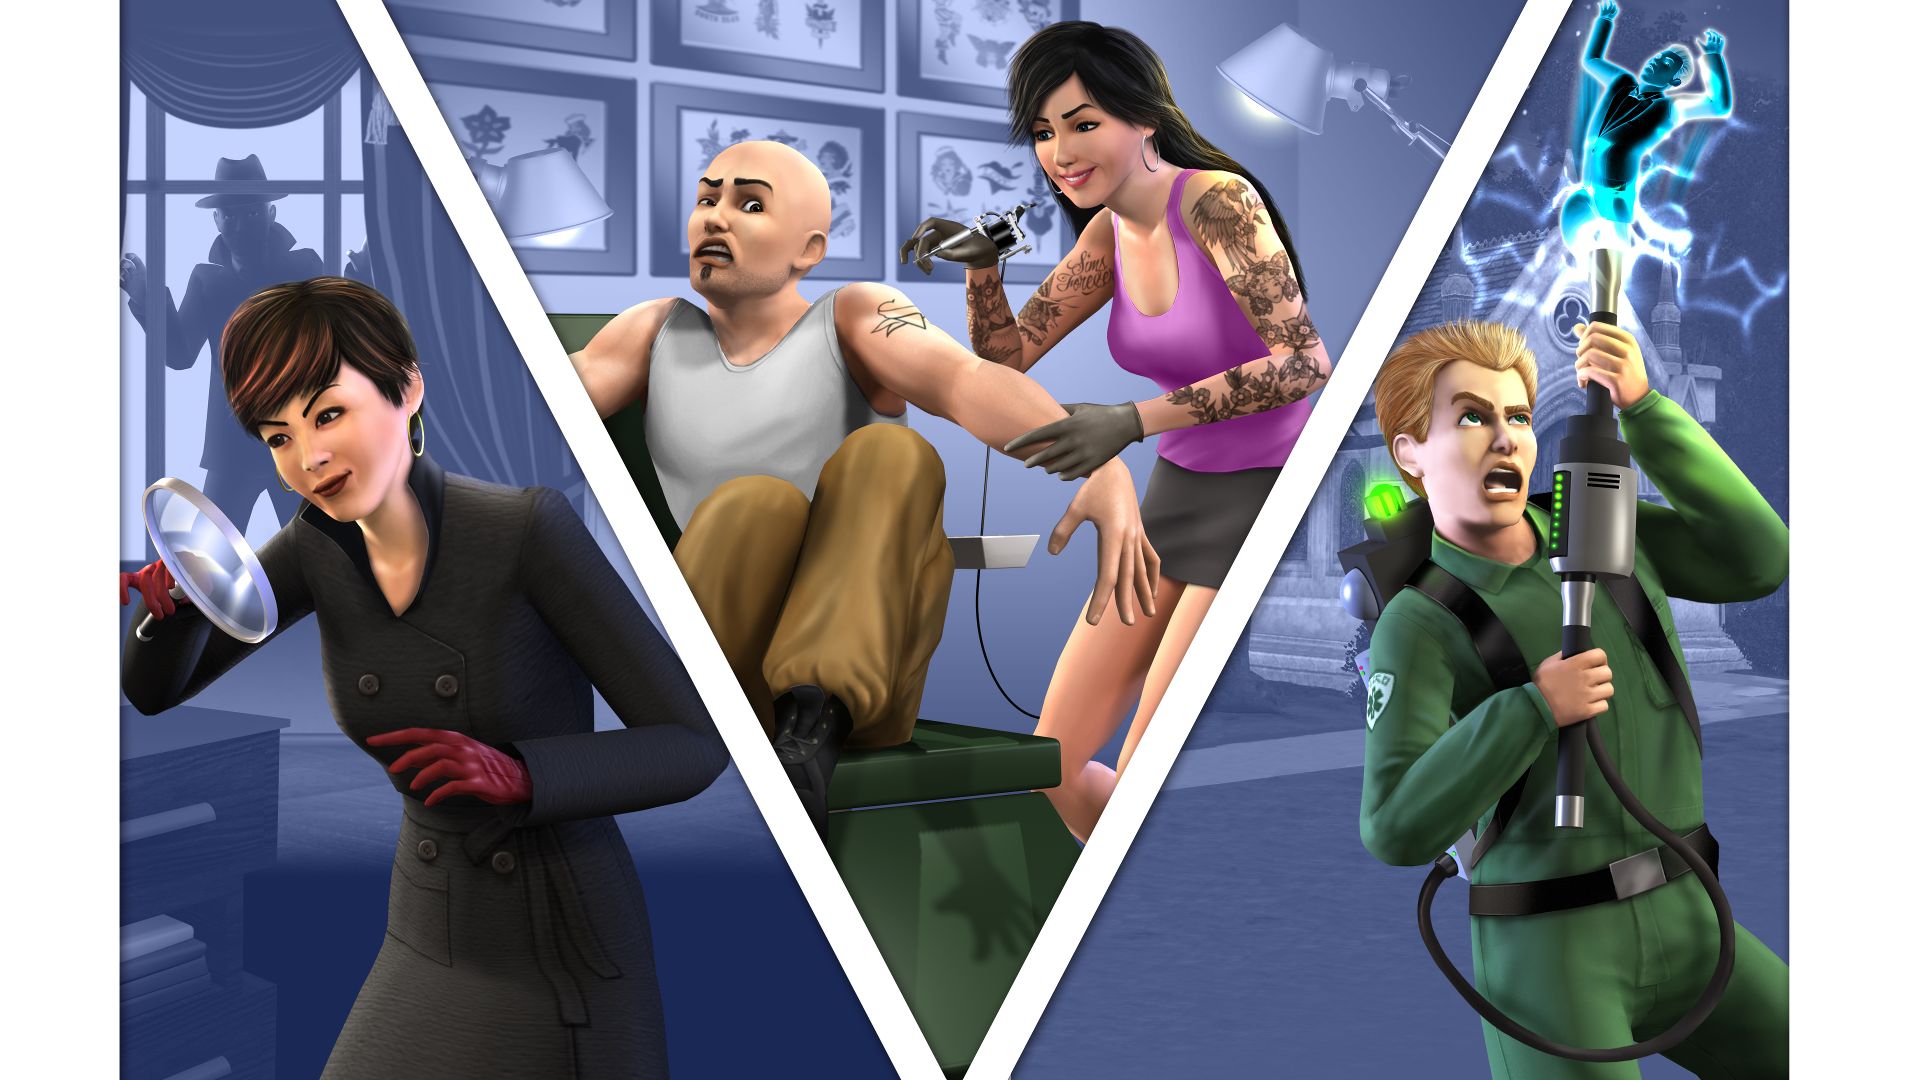 Sims 3 ambitions expansion pack free download latest version